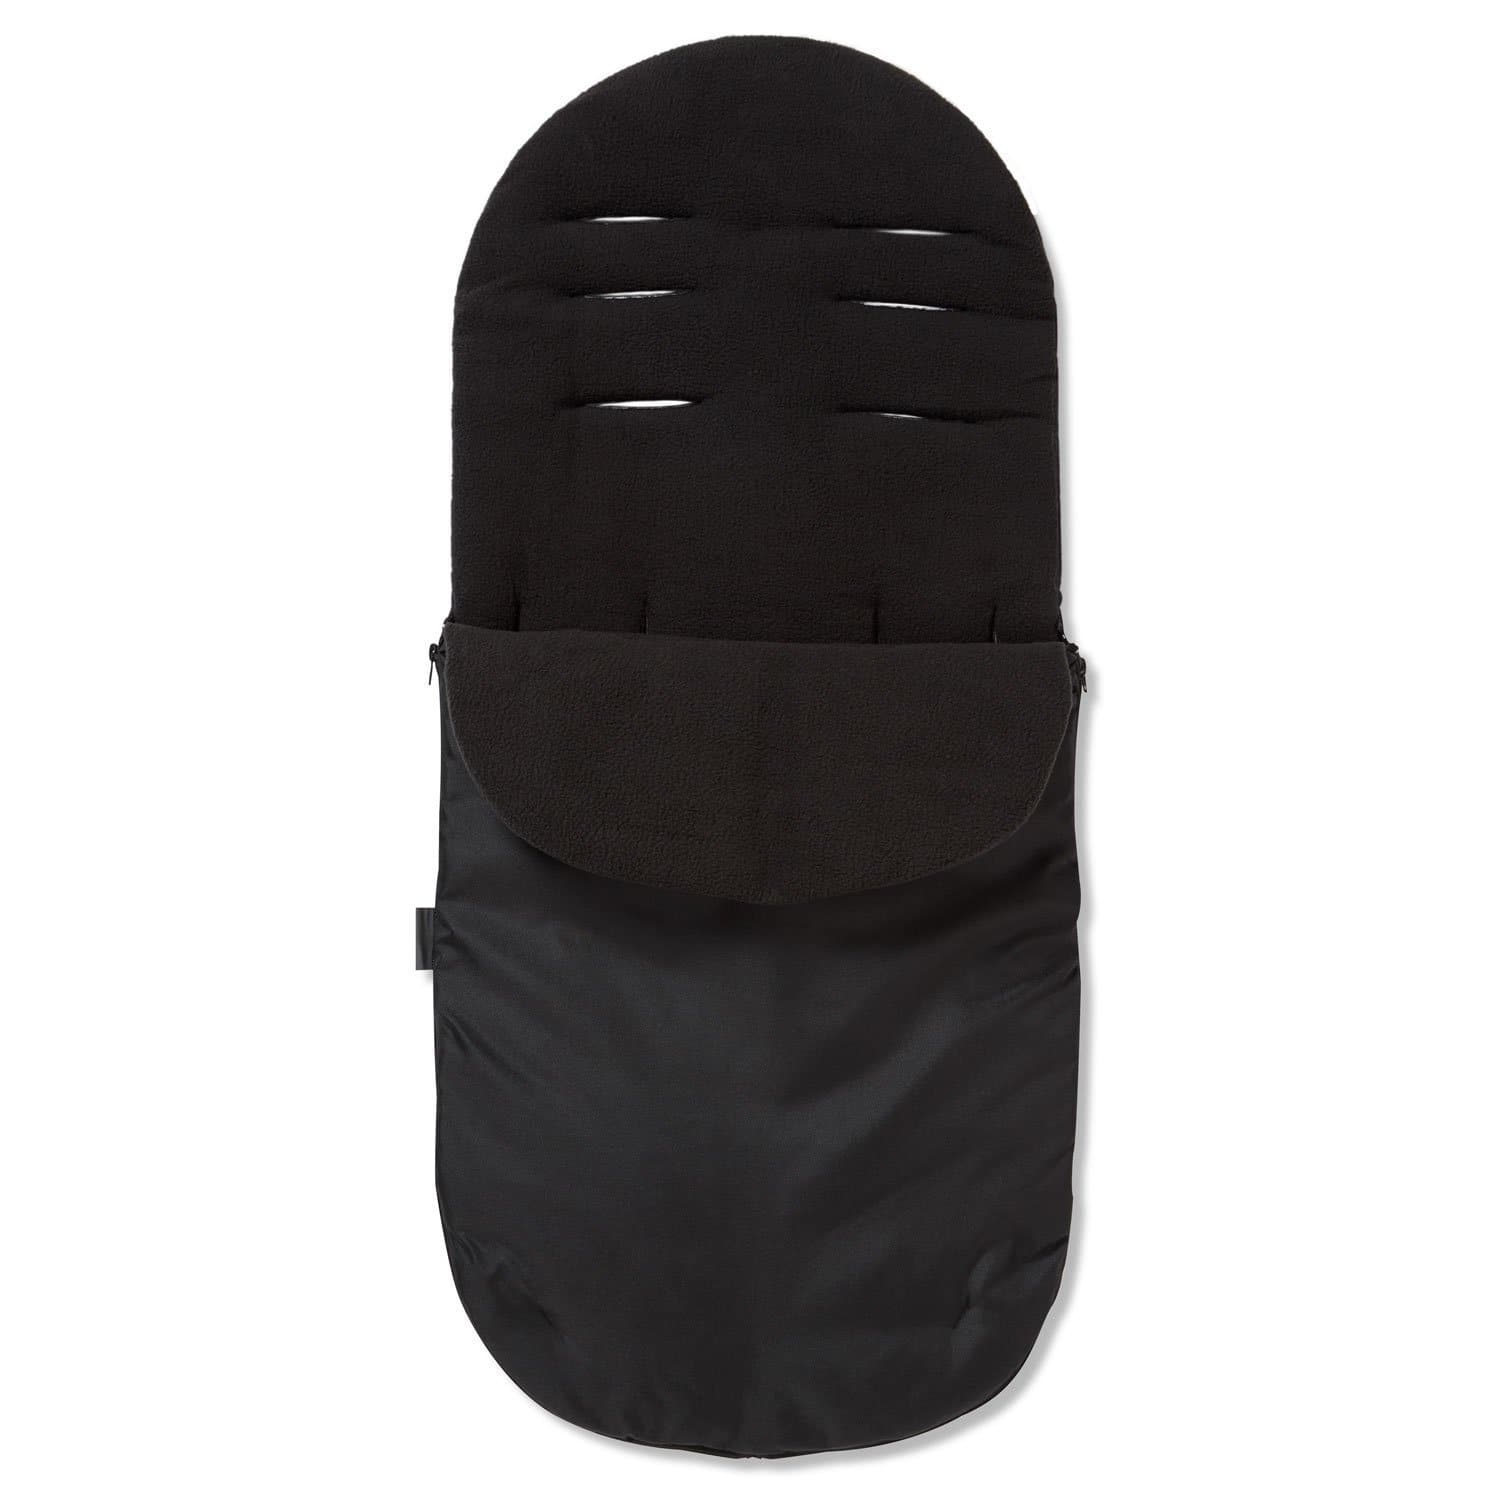 Footmuff / Cosy Toes Compatible with Zeta - Black / Fits All Models | For Your Little One